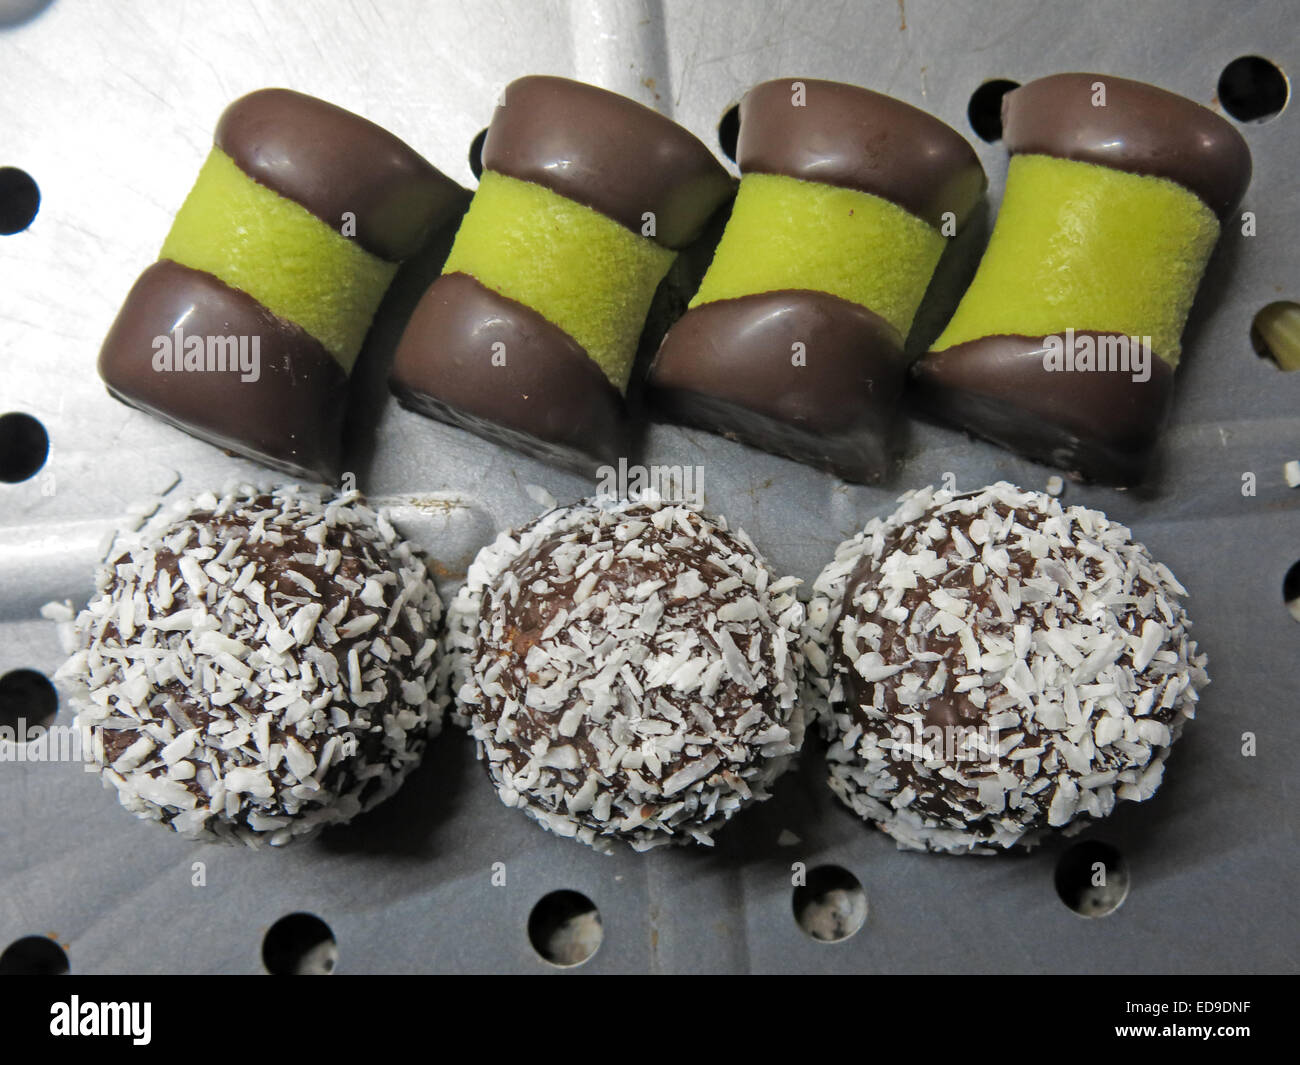 Swedish SÖTSAK DAMMSUGARE A pastry with marzipan coating and chocolate dipped ends Stock Photo